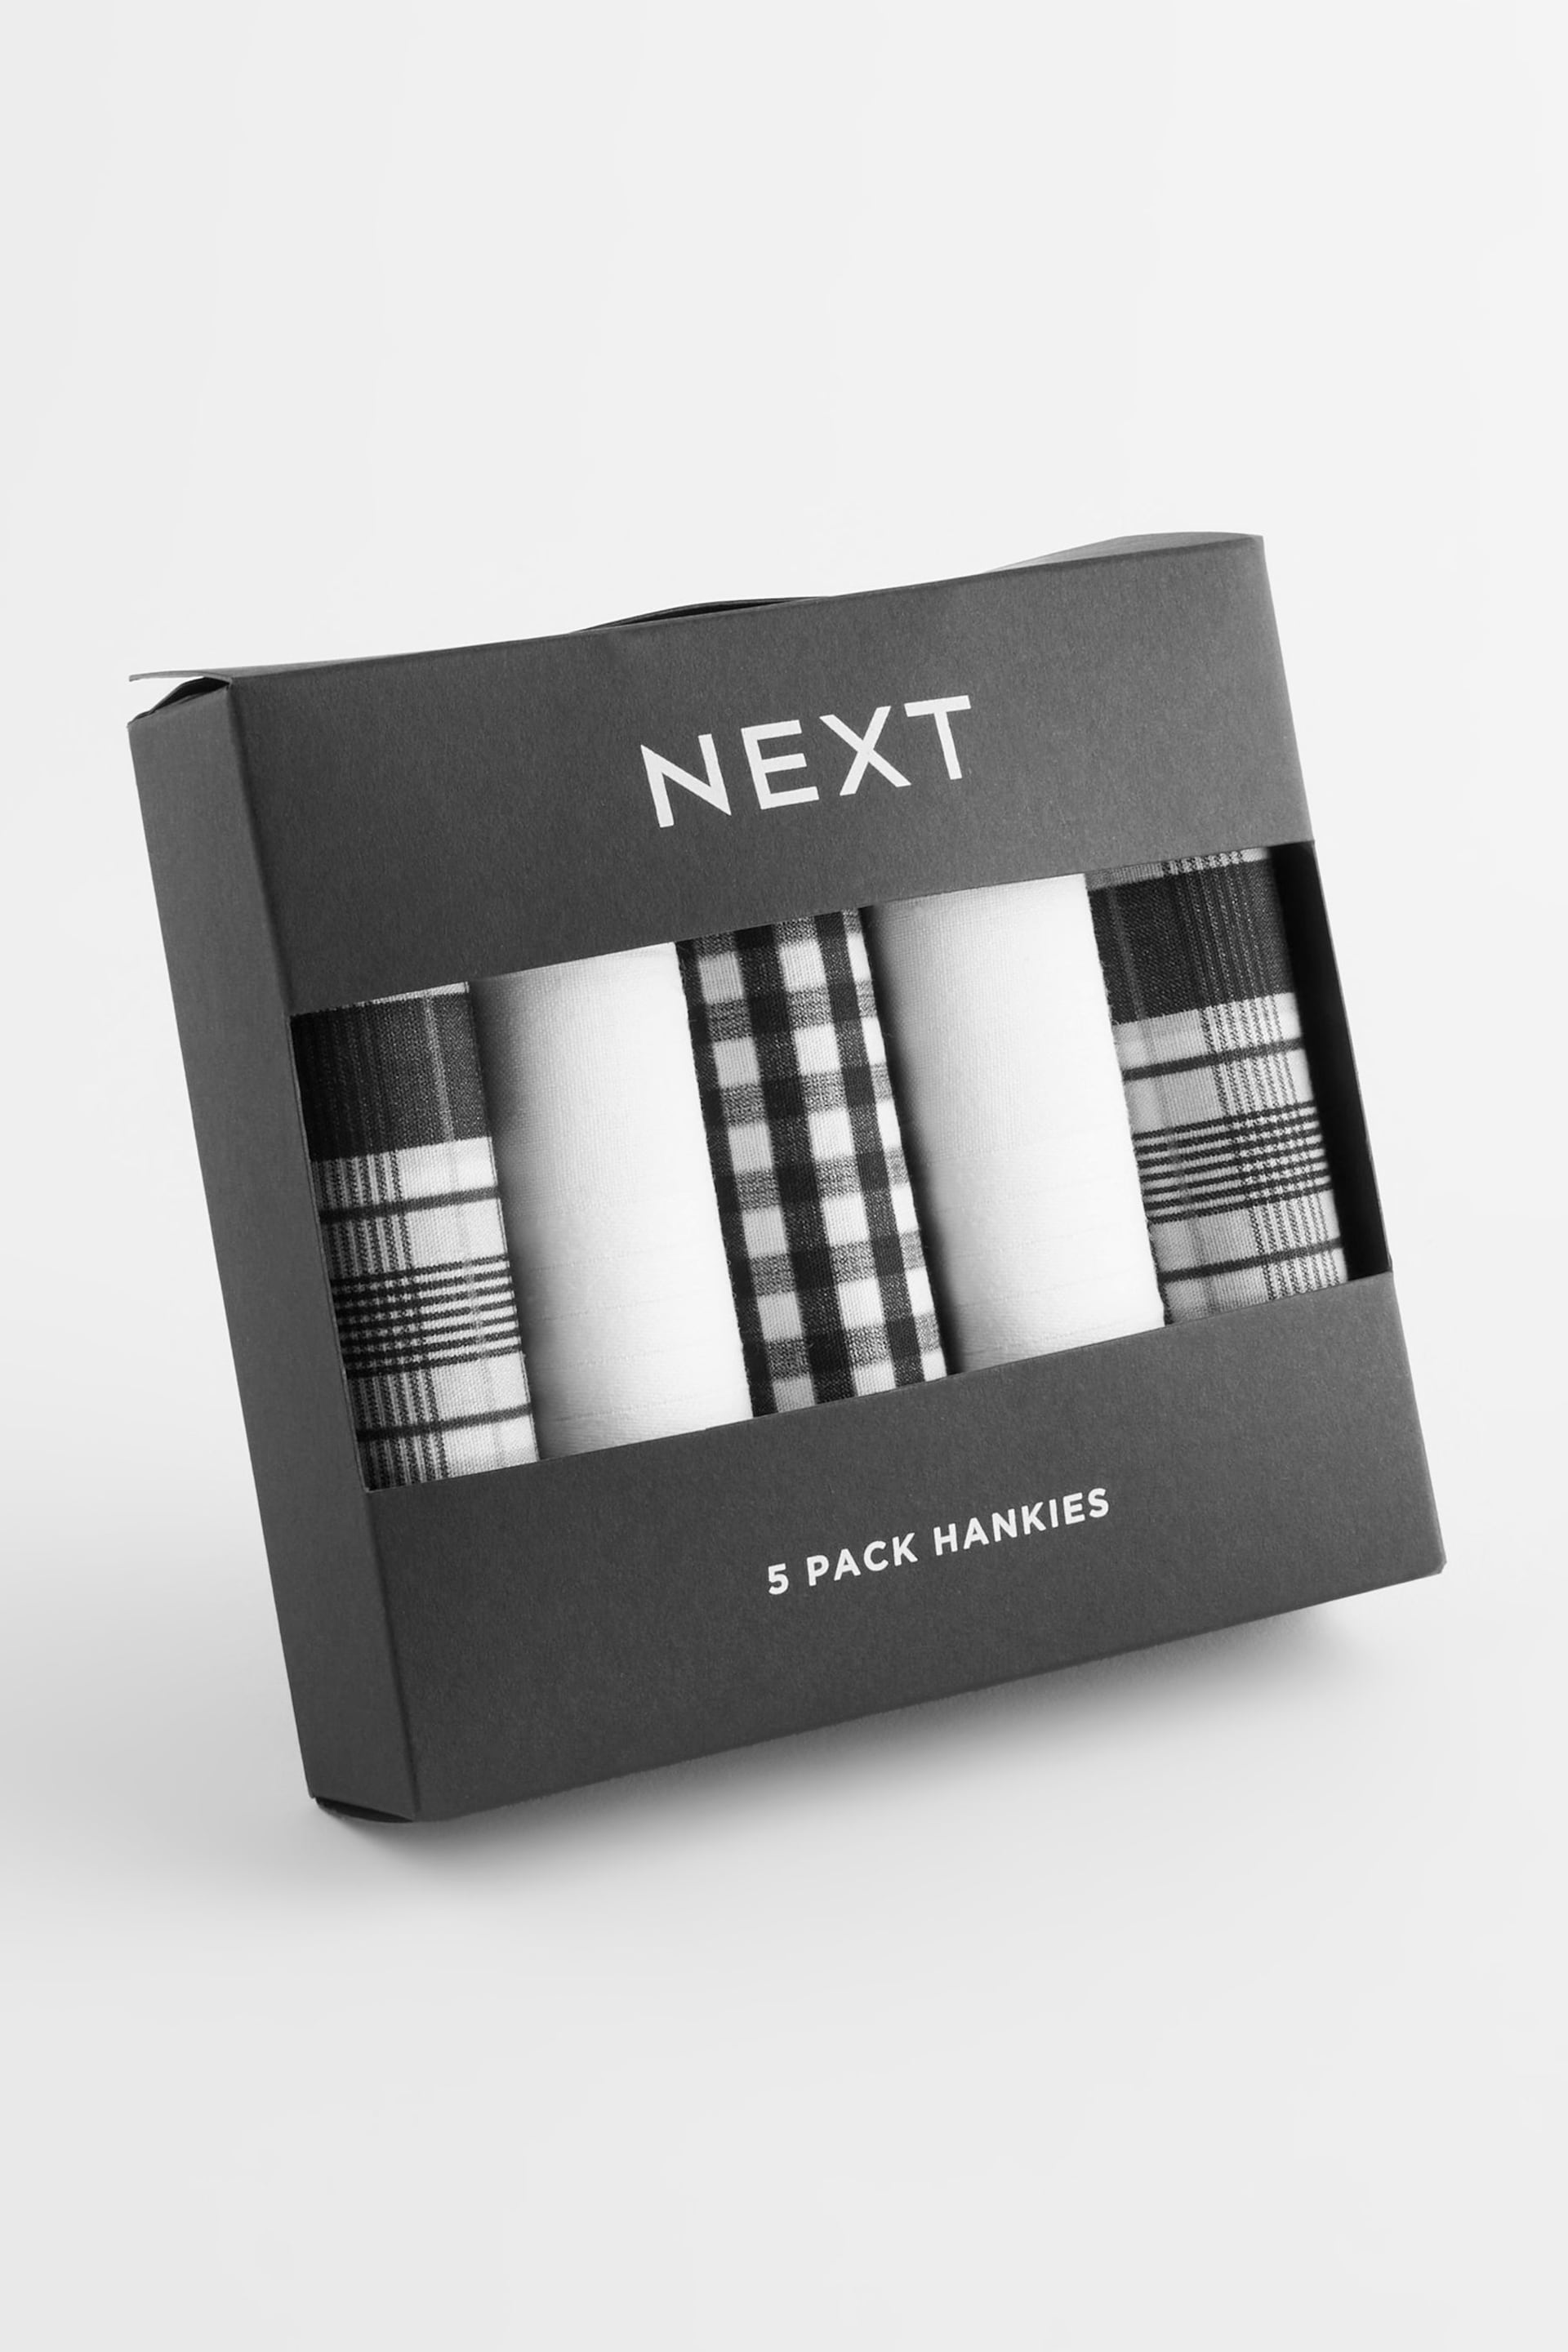 White/Black Check Geo Floral Handkerchiefs 5 Pack - Image 1 of 3